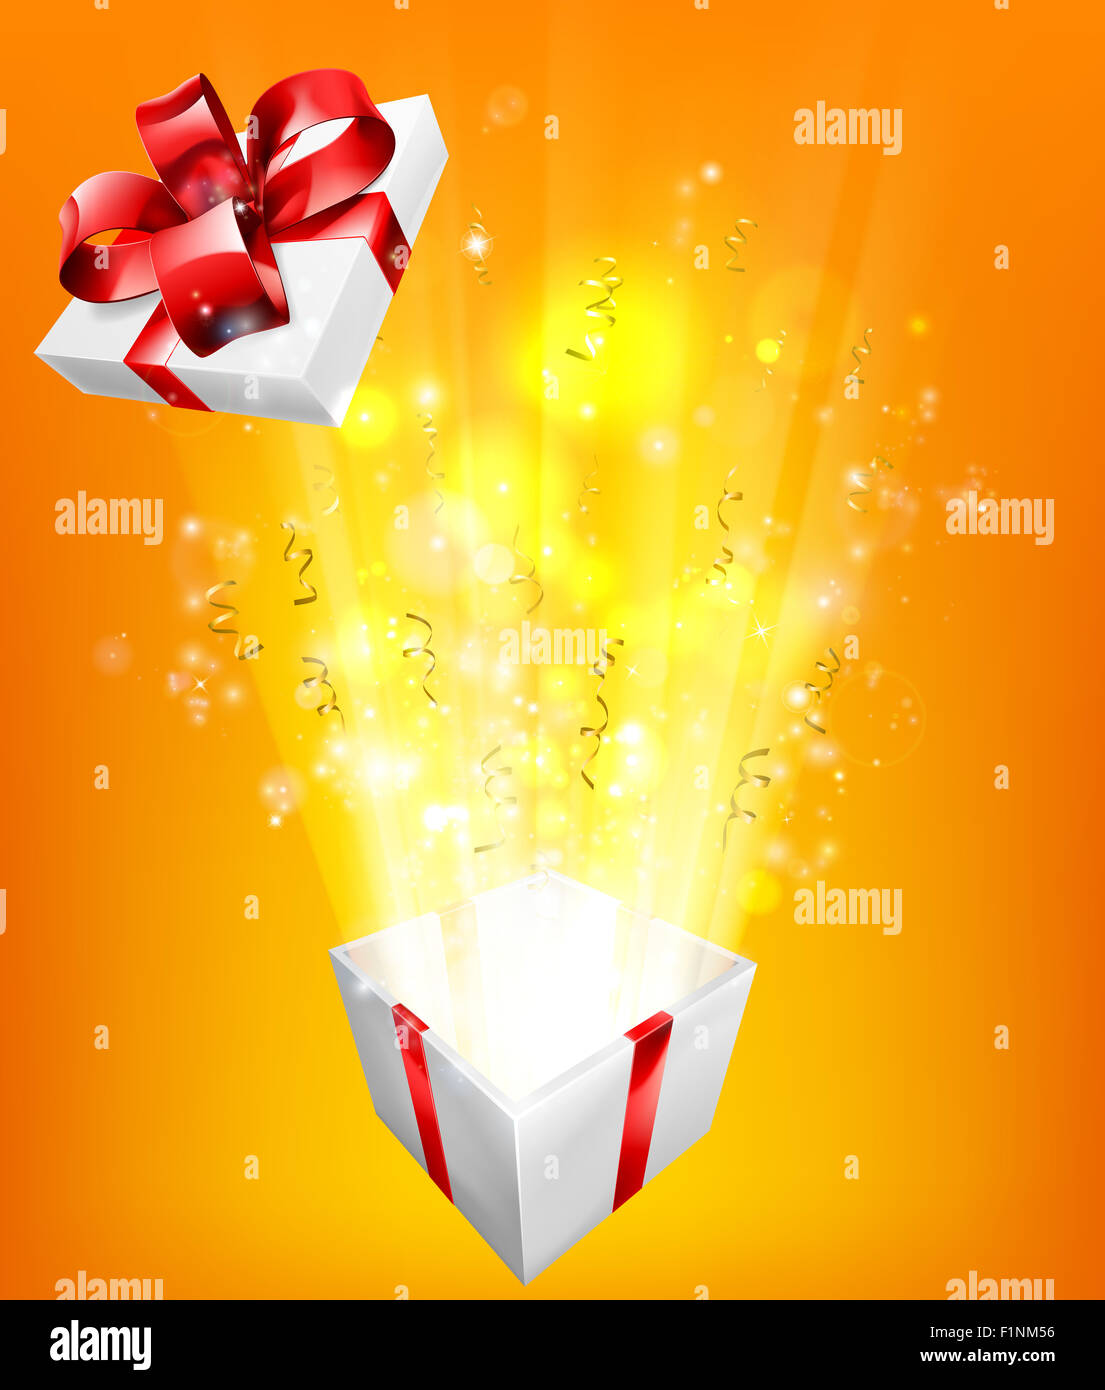 Gift box explosion concept for an exciting birthday, Christmas or